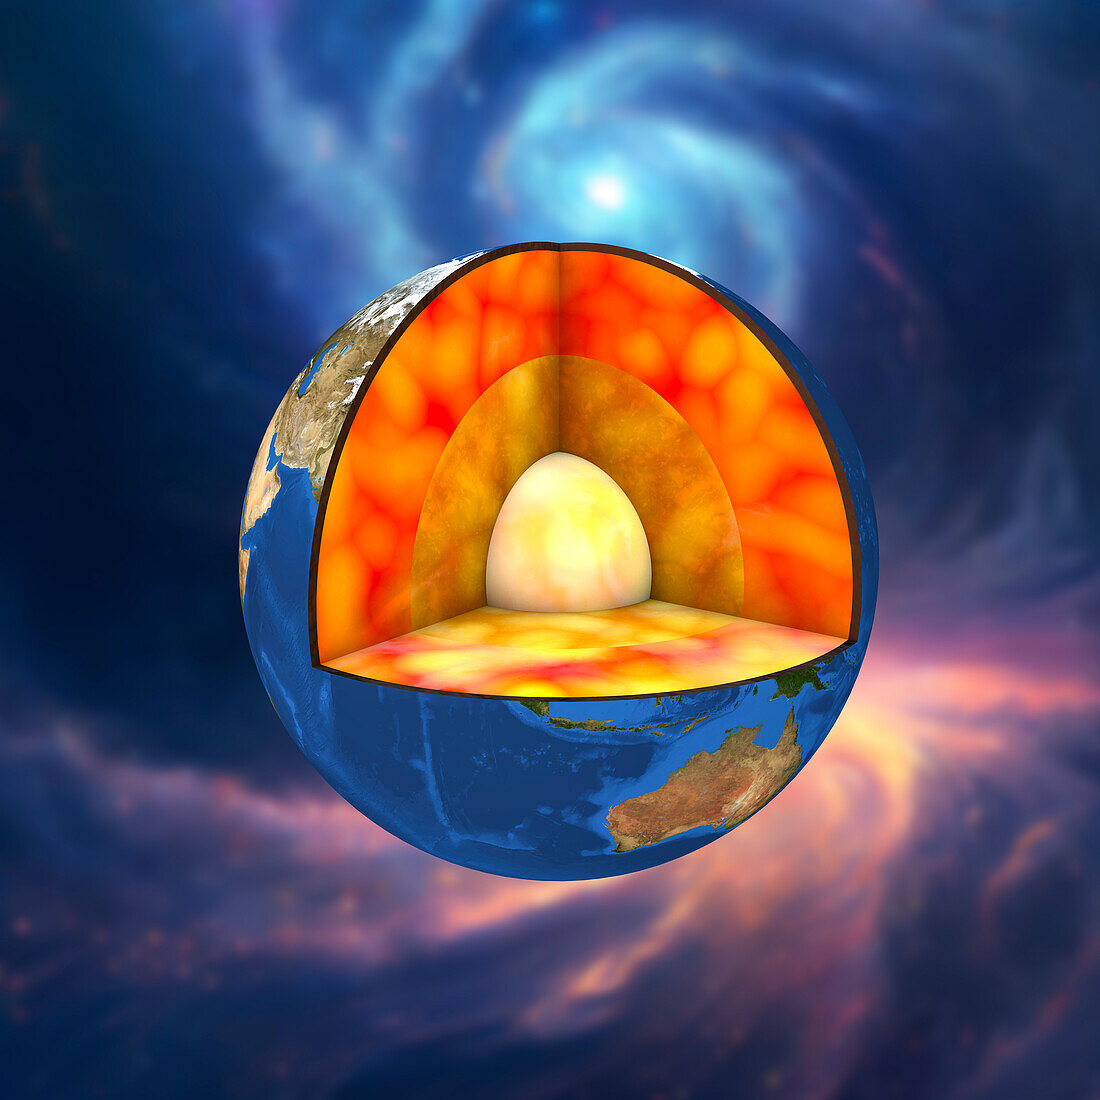 Earth's internal structure, illustration